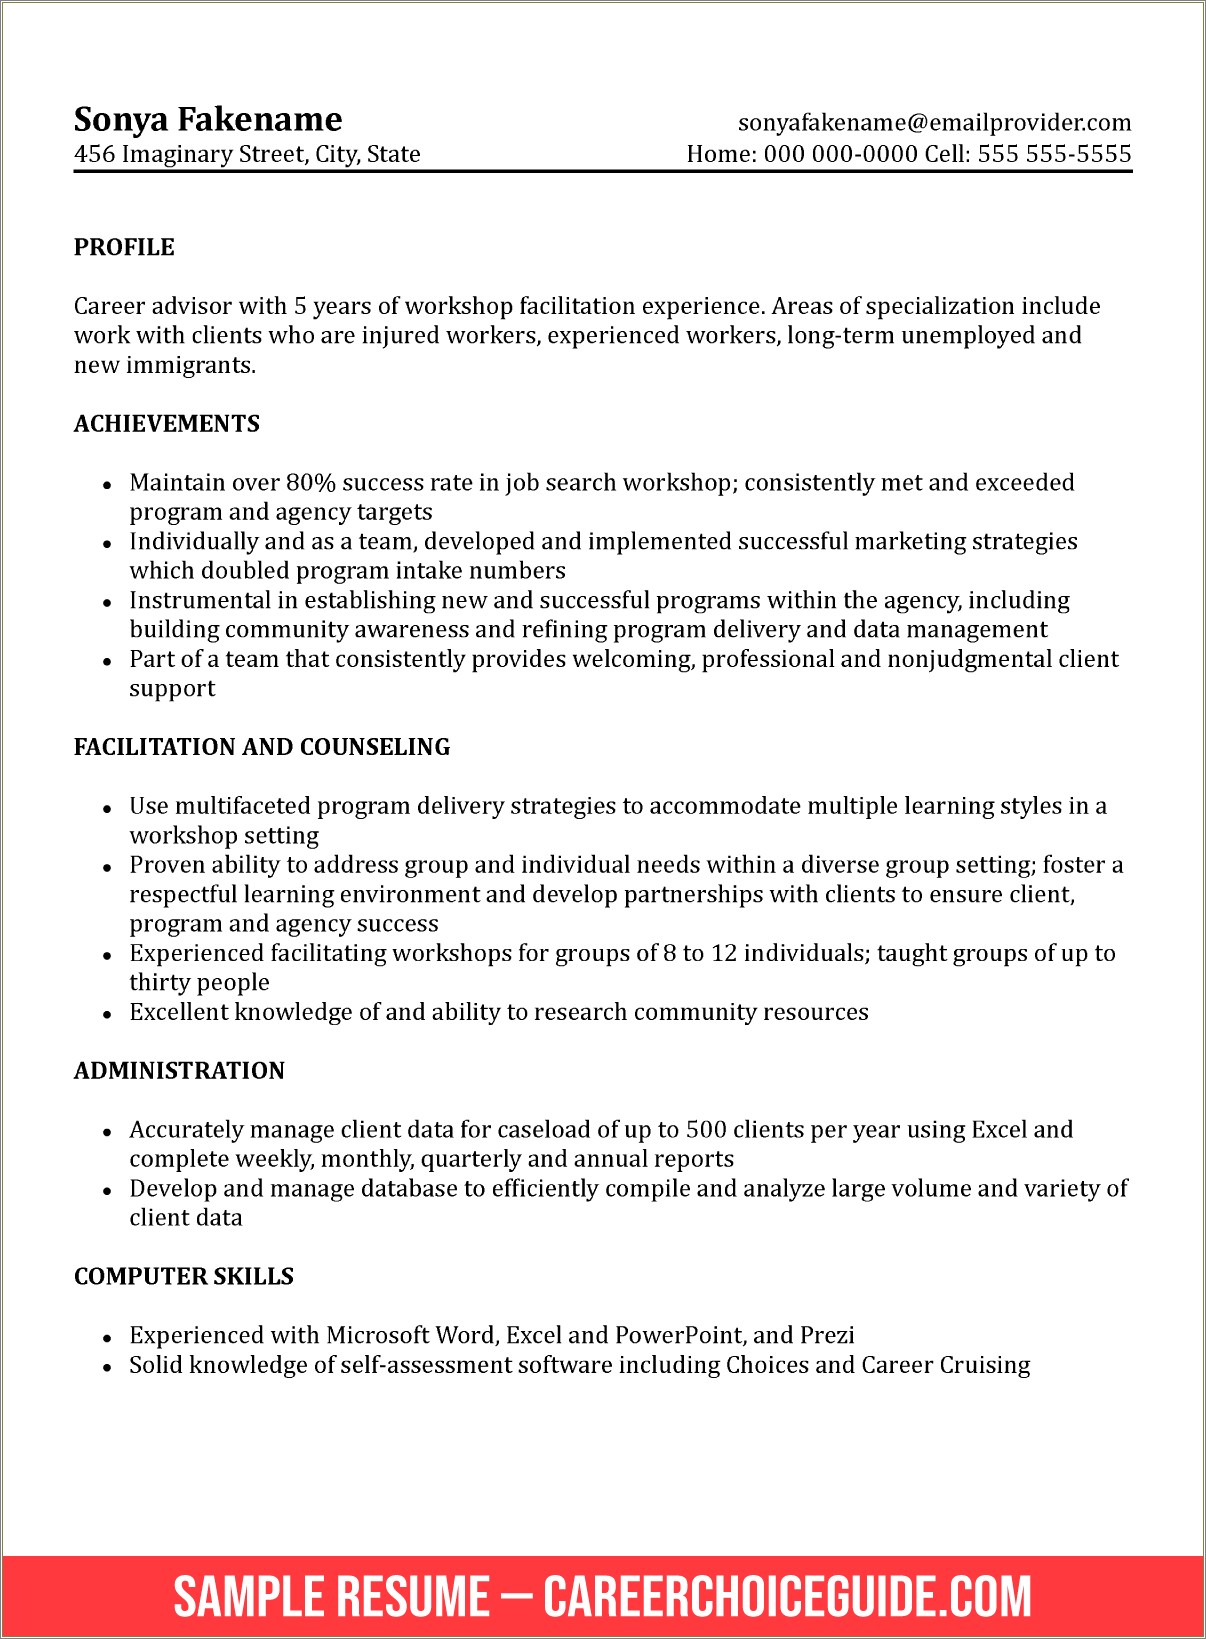 Examples Of School Counselor Resumes